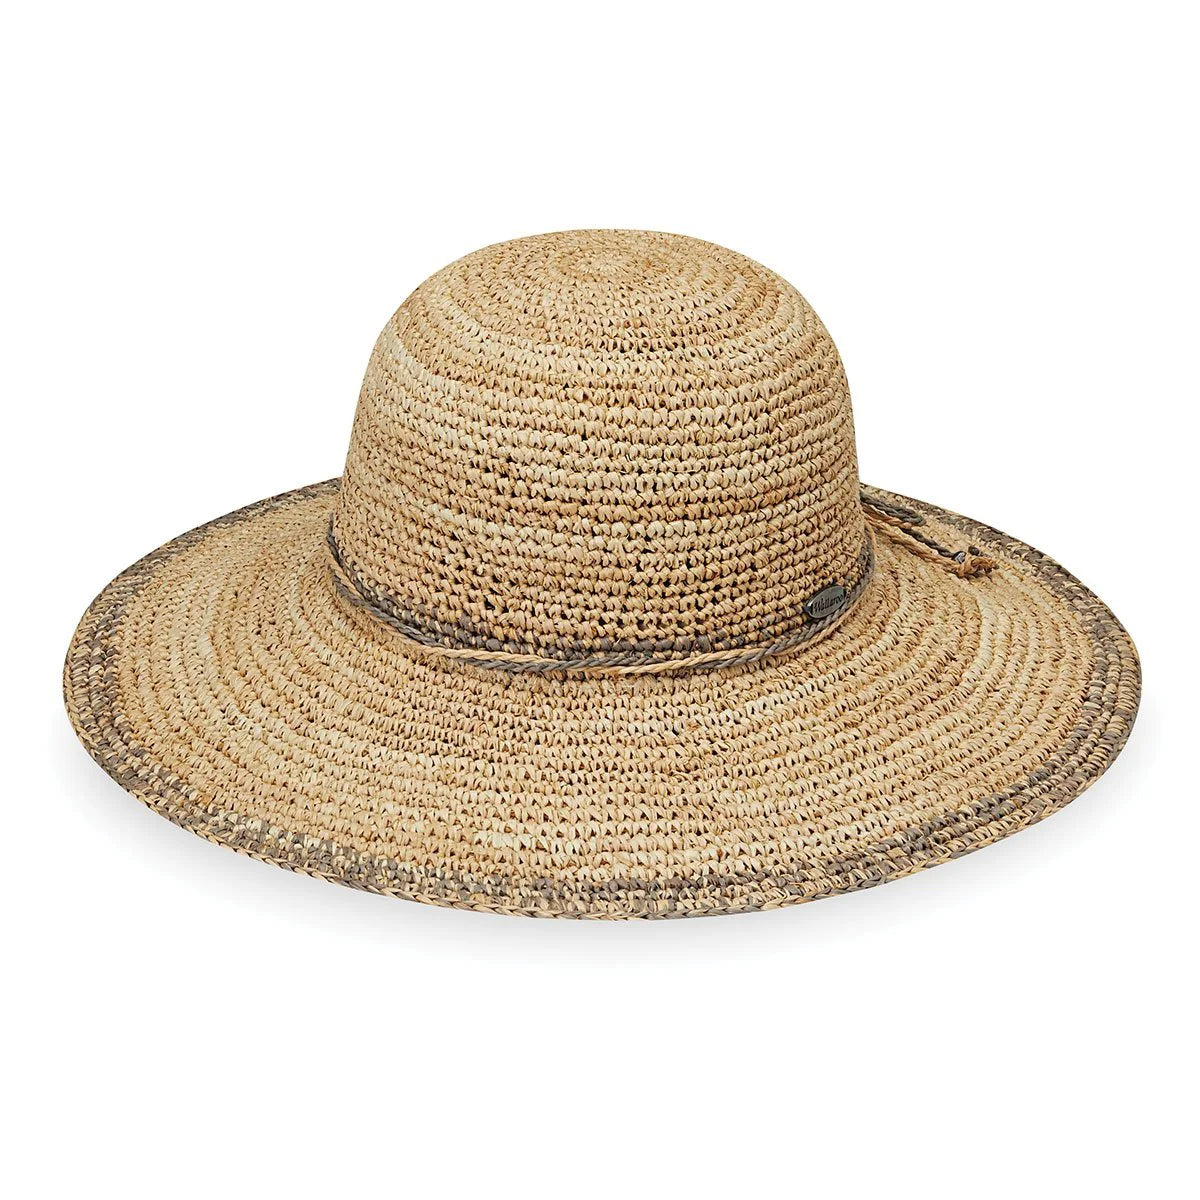 The Wallaroo Camille hat will be your first pick when getting ready for a picnic with friends or lounging by the pool. Made with 100% raffia, this wide brimmed straw hat stays cool and comfortable on a hot summer day.